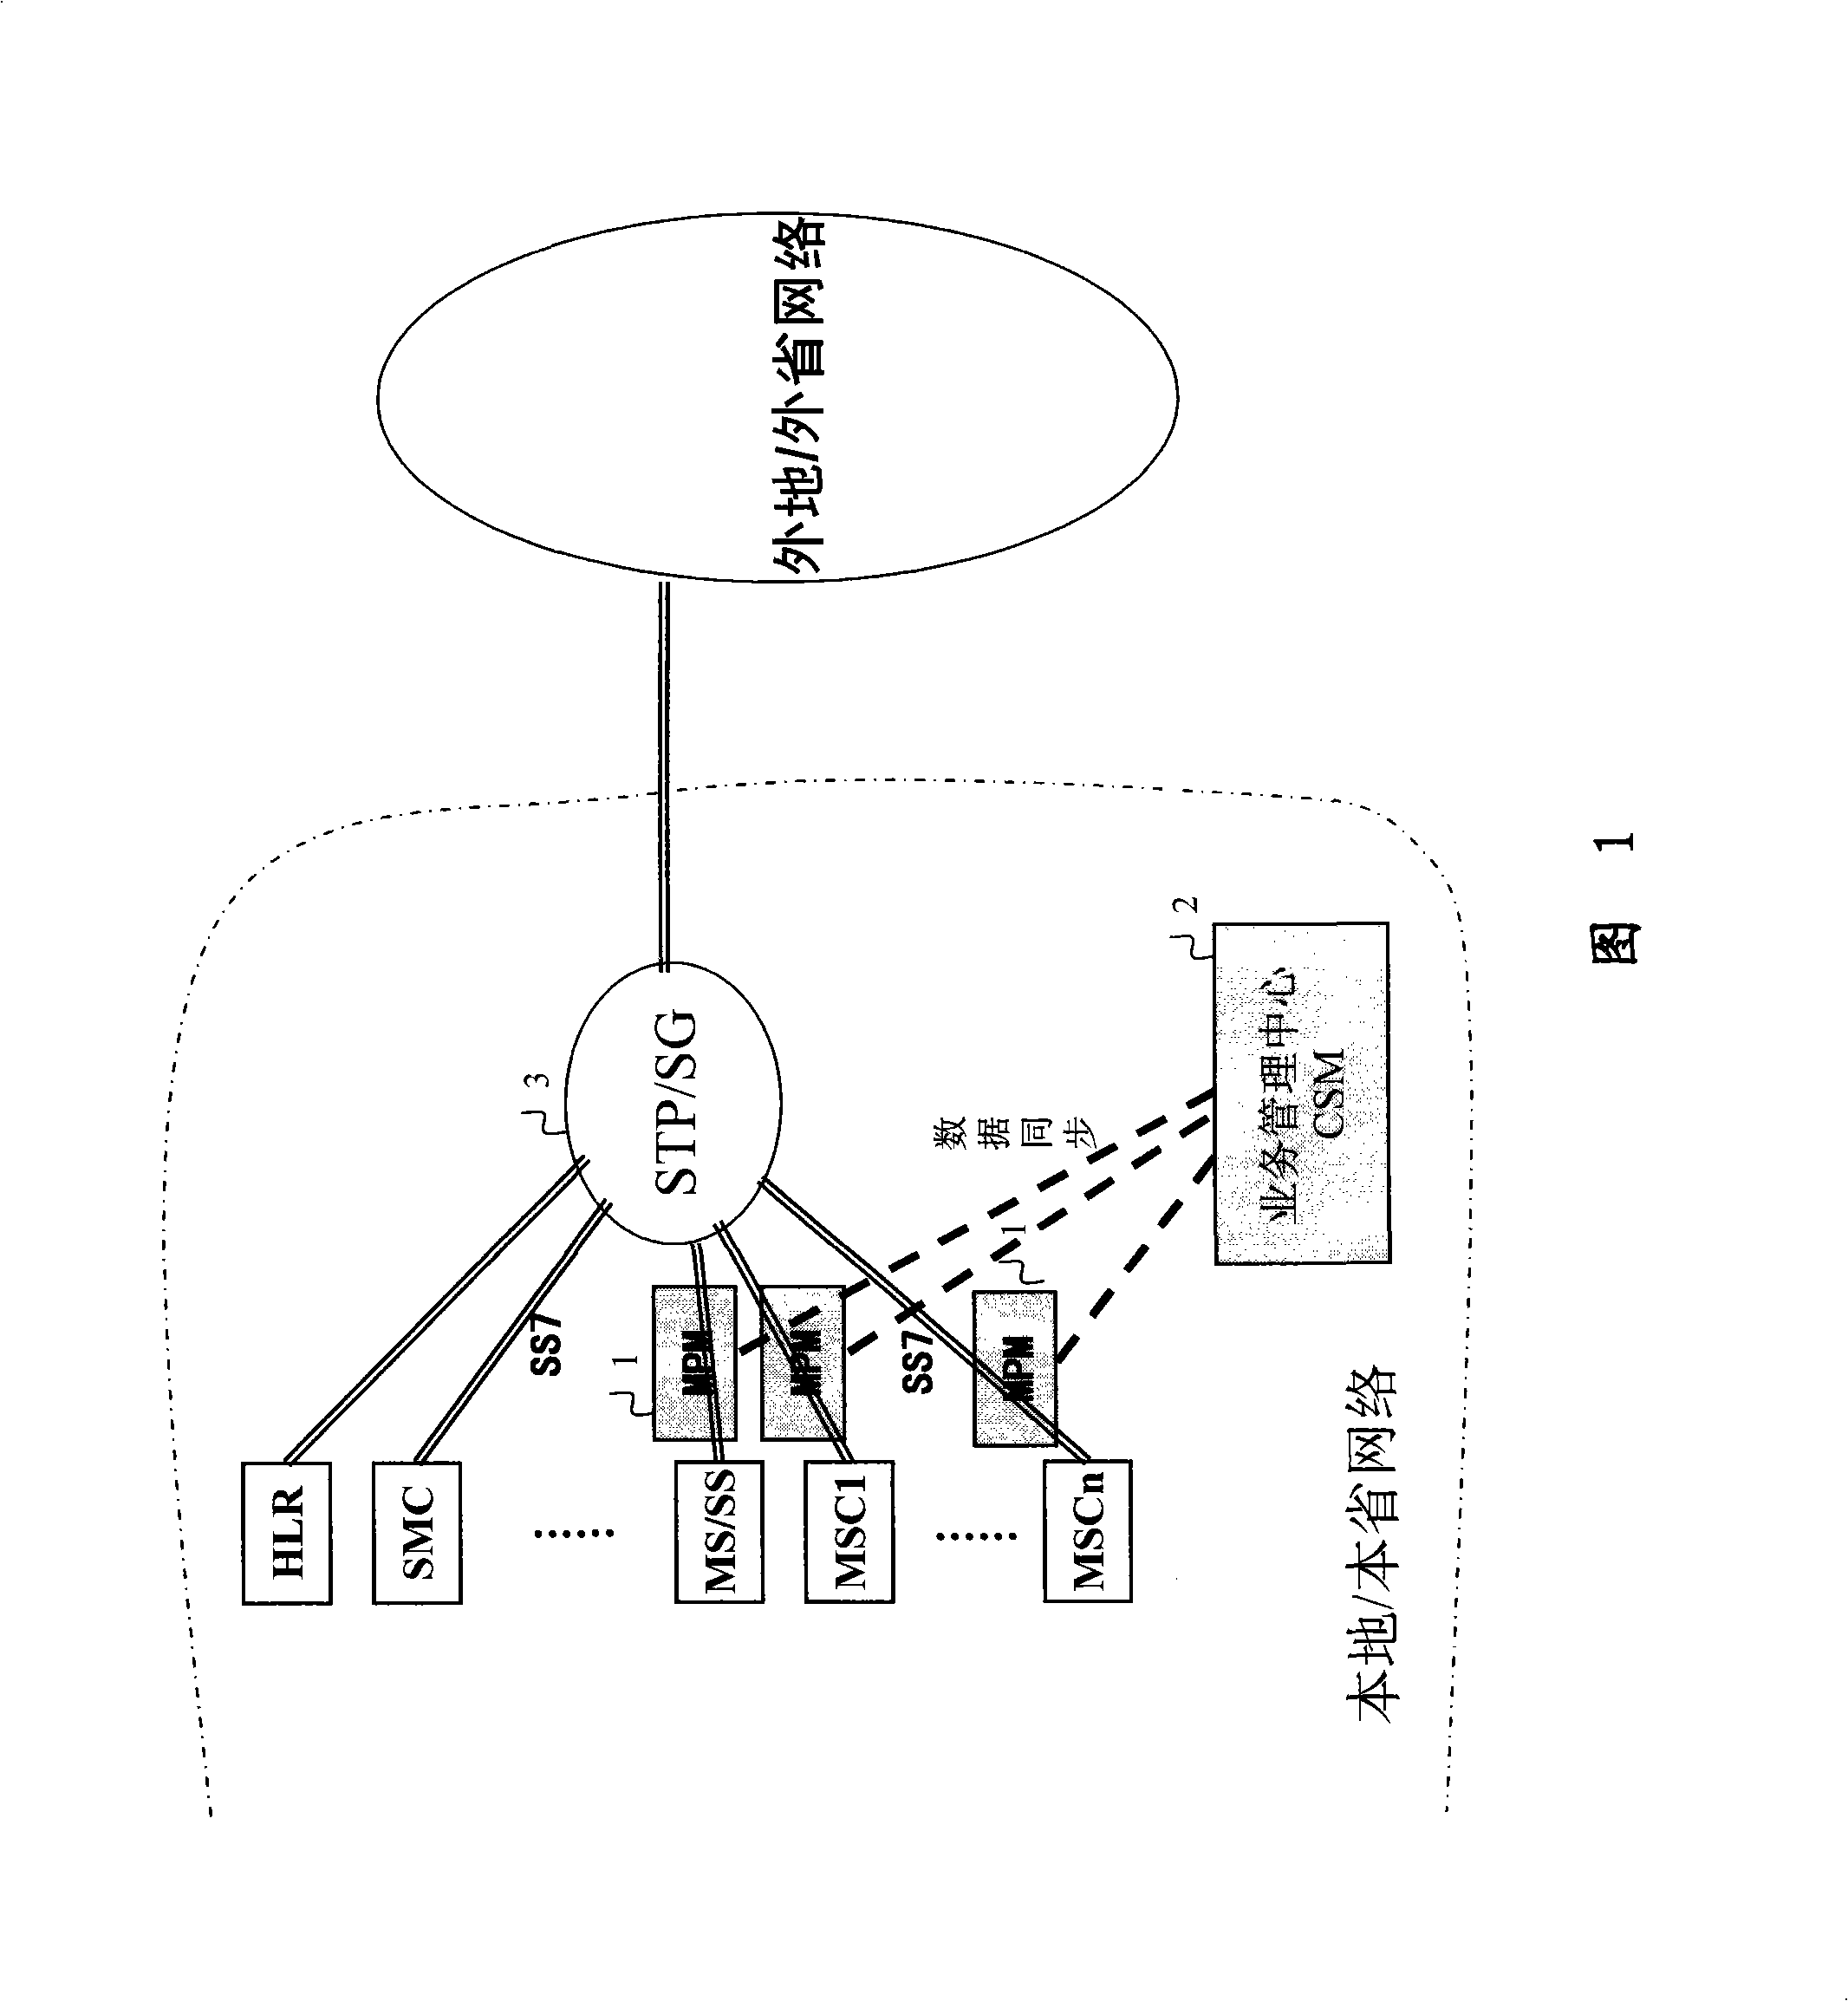 System and method for detecting and limiting line resource occupation by calling back